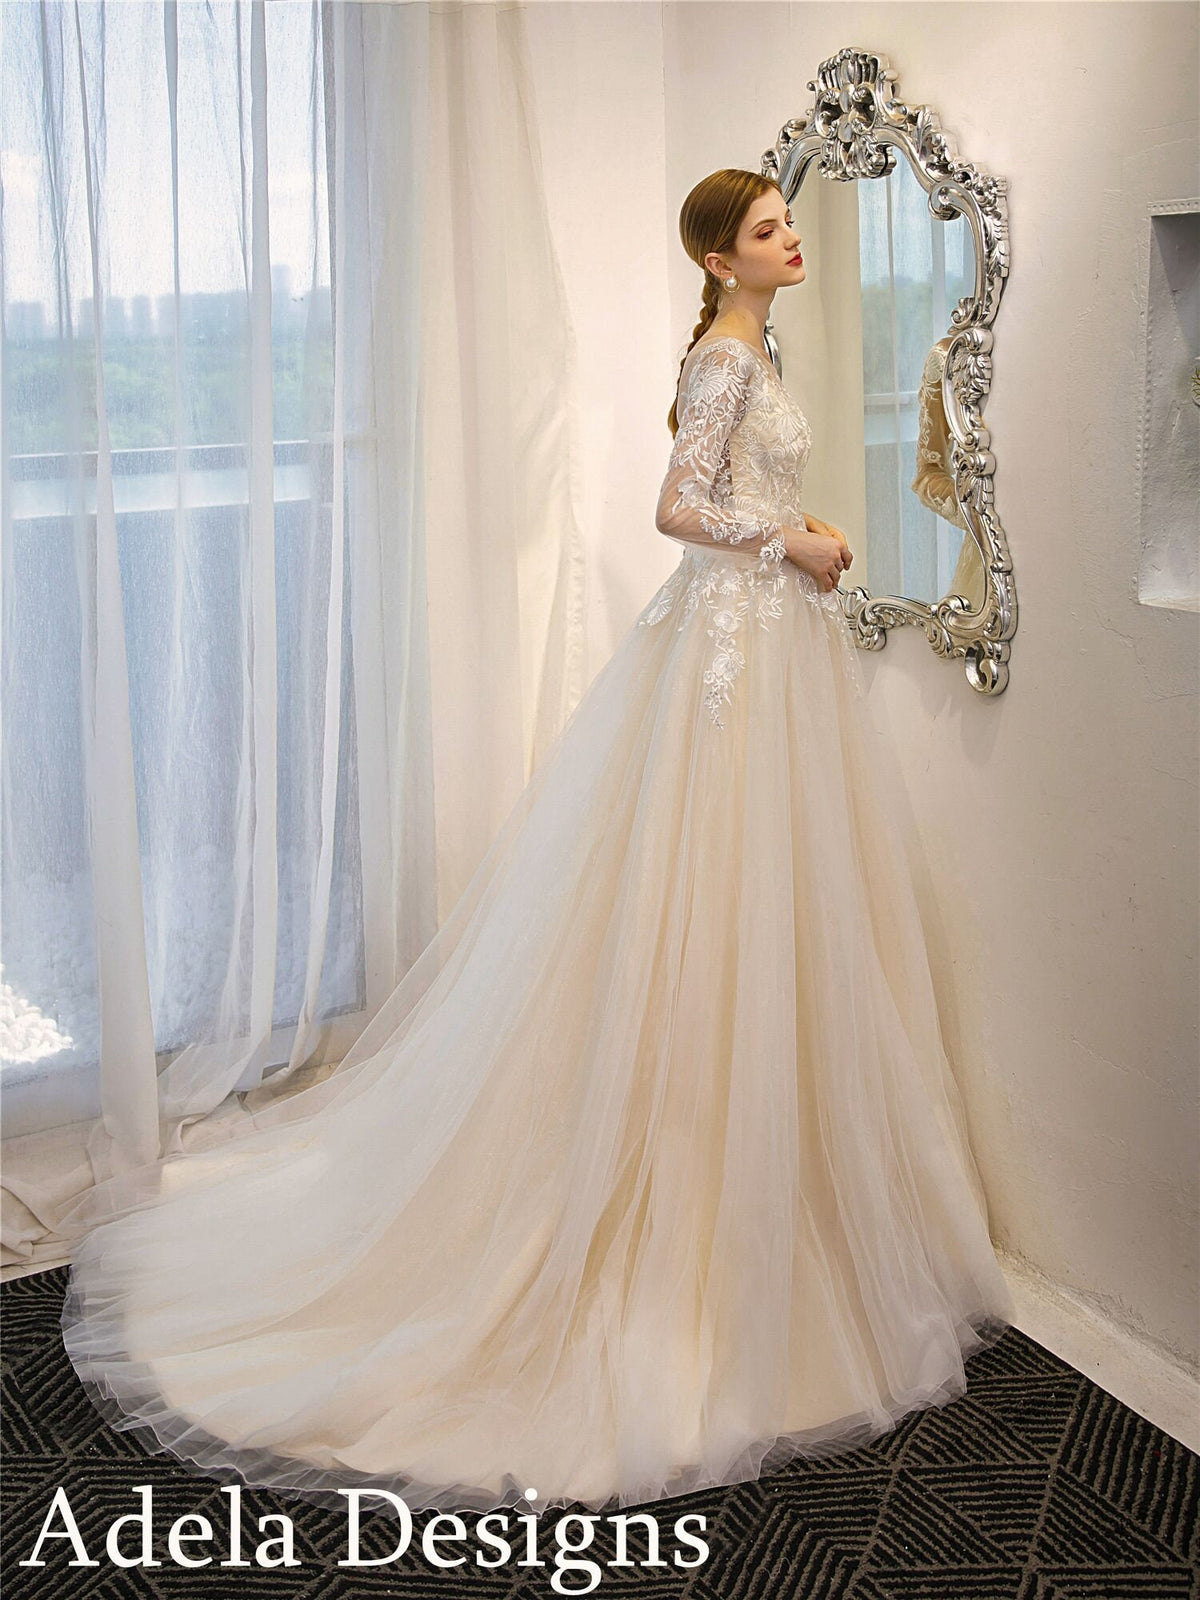 Classic Floral Lace Tulle A-Line Wedding Dress Bridal Gown Long Illusion Lace Sleeves Illusion Open Back Buttons and Train